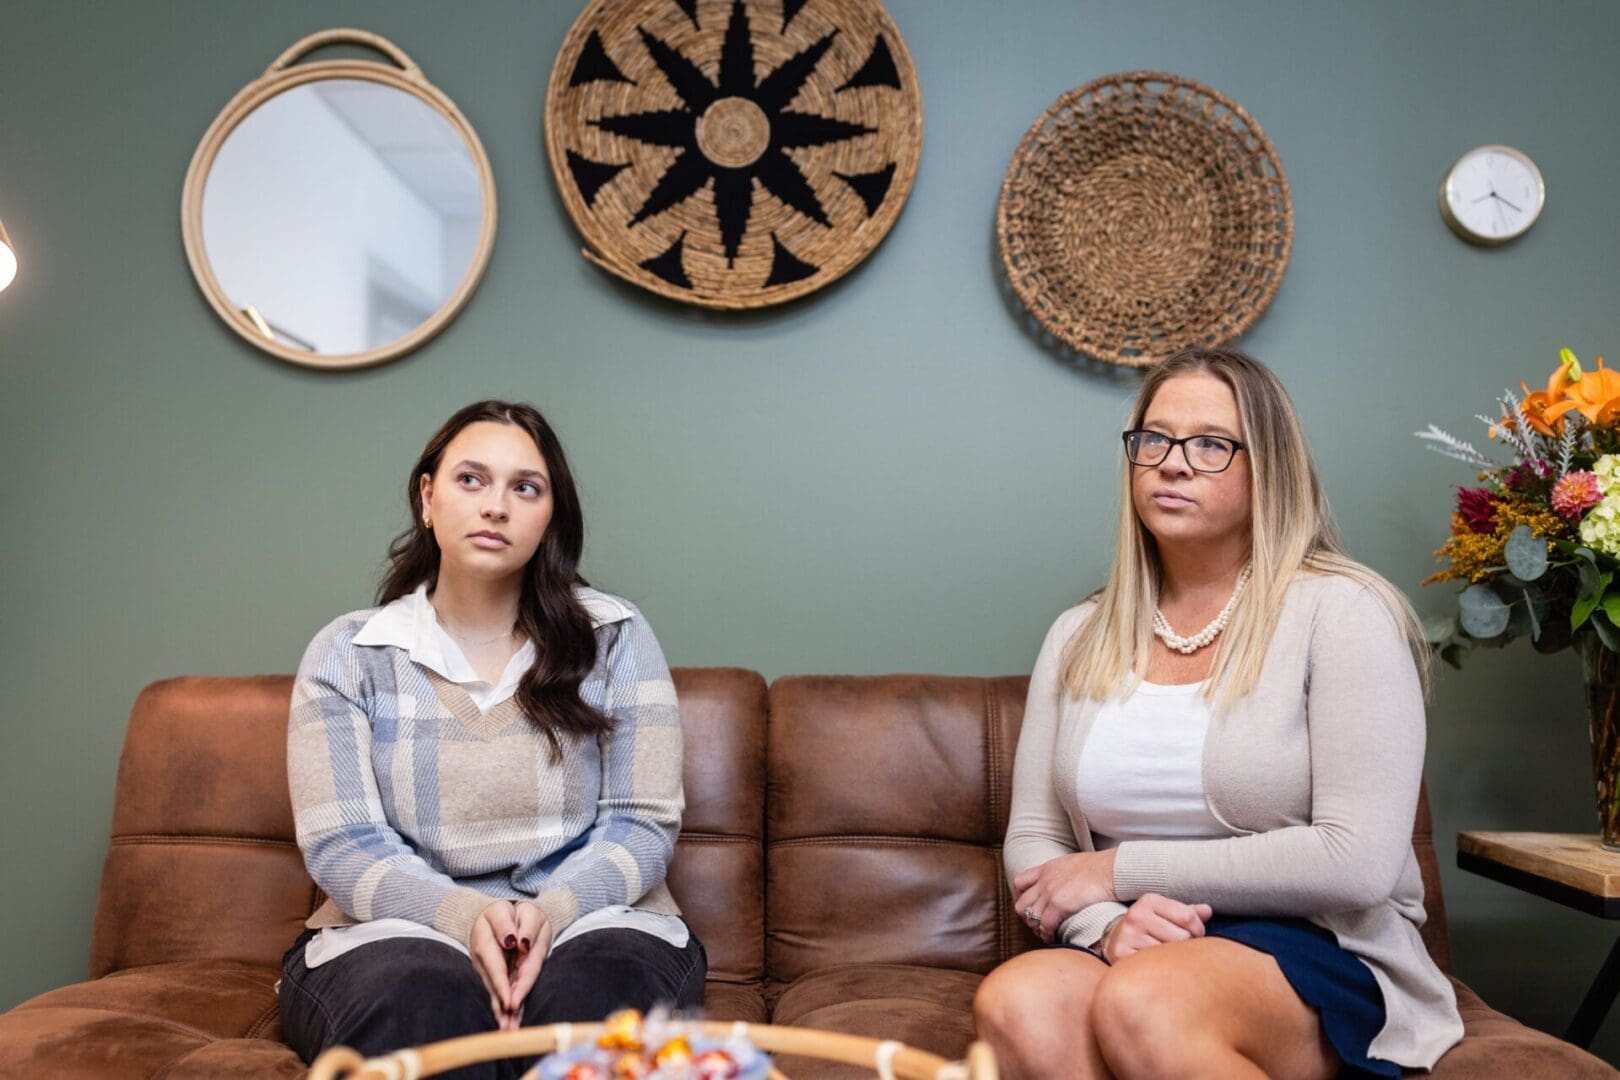 Two women sitting on a couch in front of wall hangings.